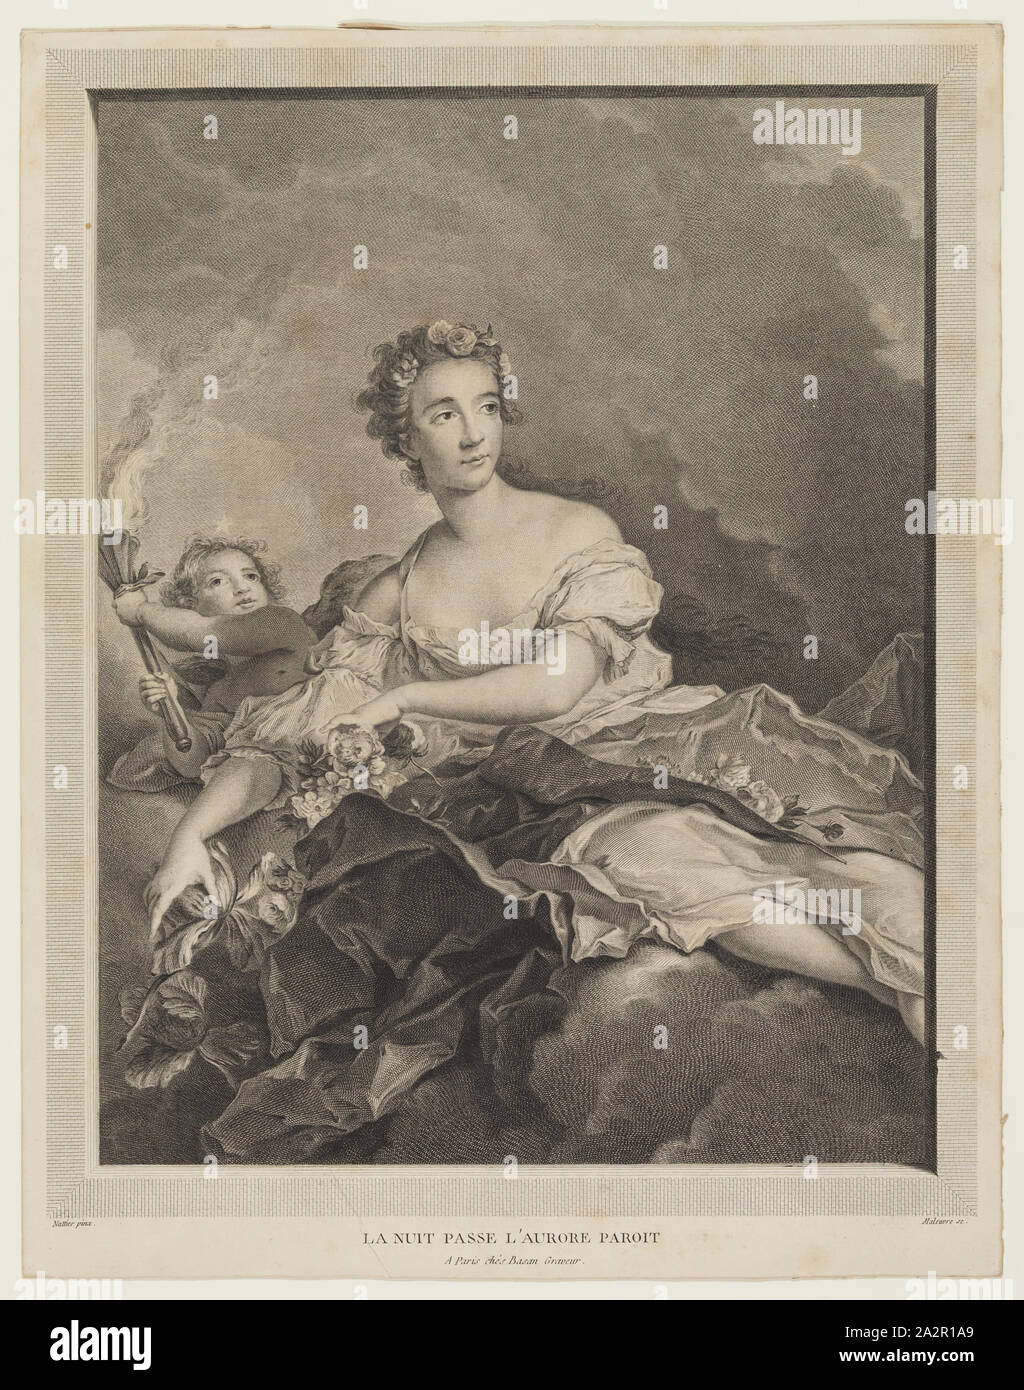 Pierre Maleuvre, French, 1740-1803, after Jean Marc Nattier, French, 1685-1766, La Nuit passe, l'Aurore paroit, 18th Century, Engraving and etching printed in black on laid paper, sheet trimmed within plate mark Stock Photo